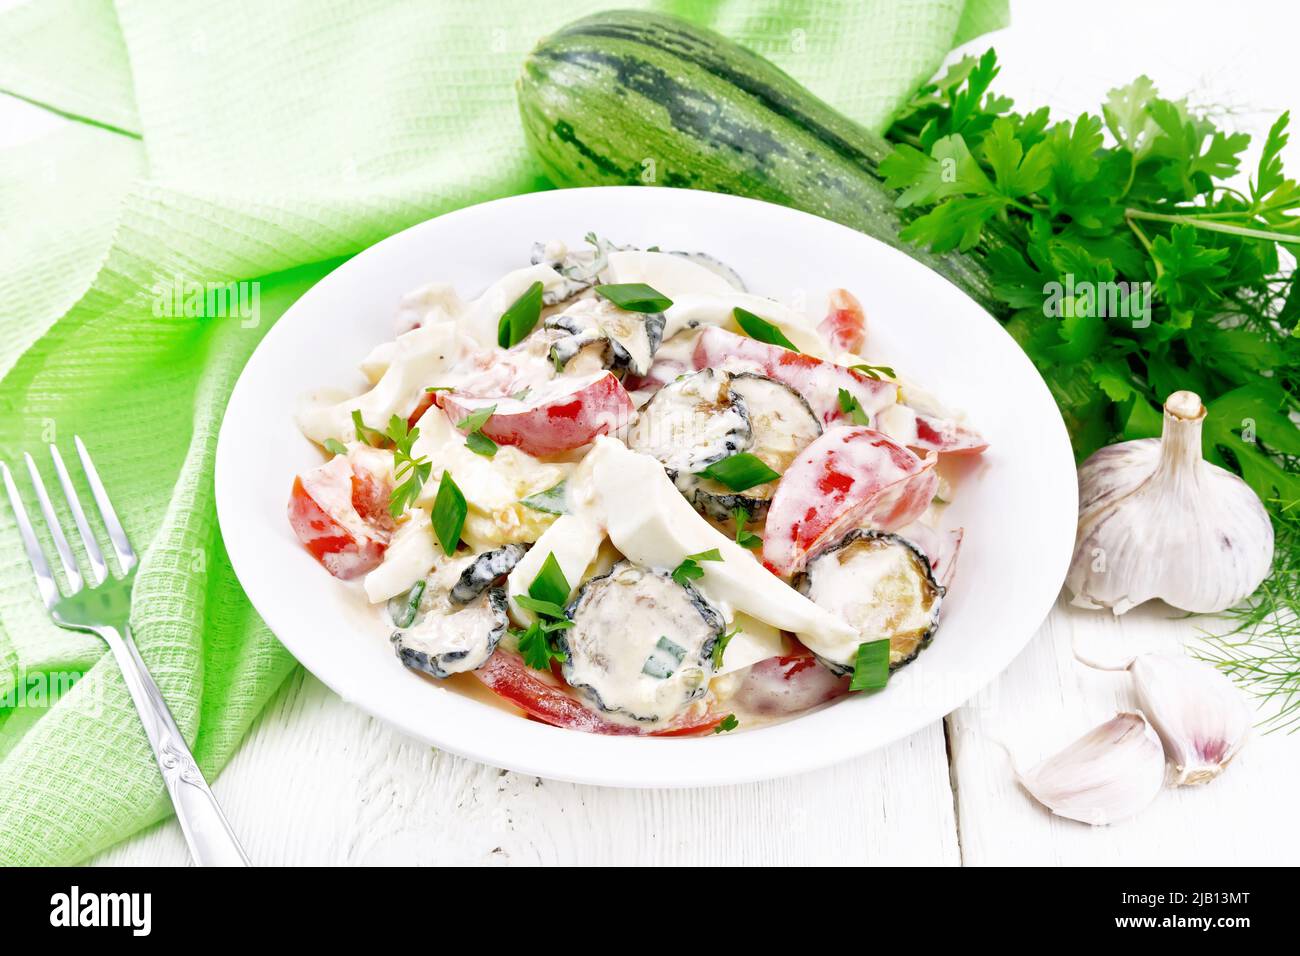 Salad with fried zucchini, boiled egg, fresh tomato and garlic, dressed with mayonnaise in plate, napkin and parsley on white wooden board background Stock Photo